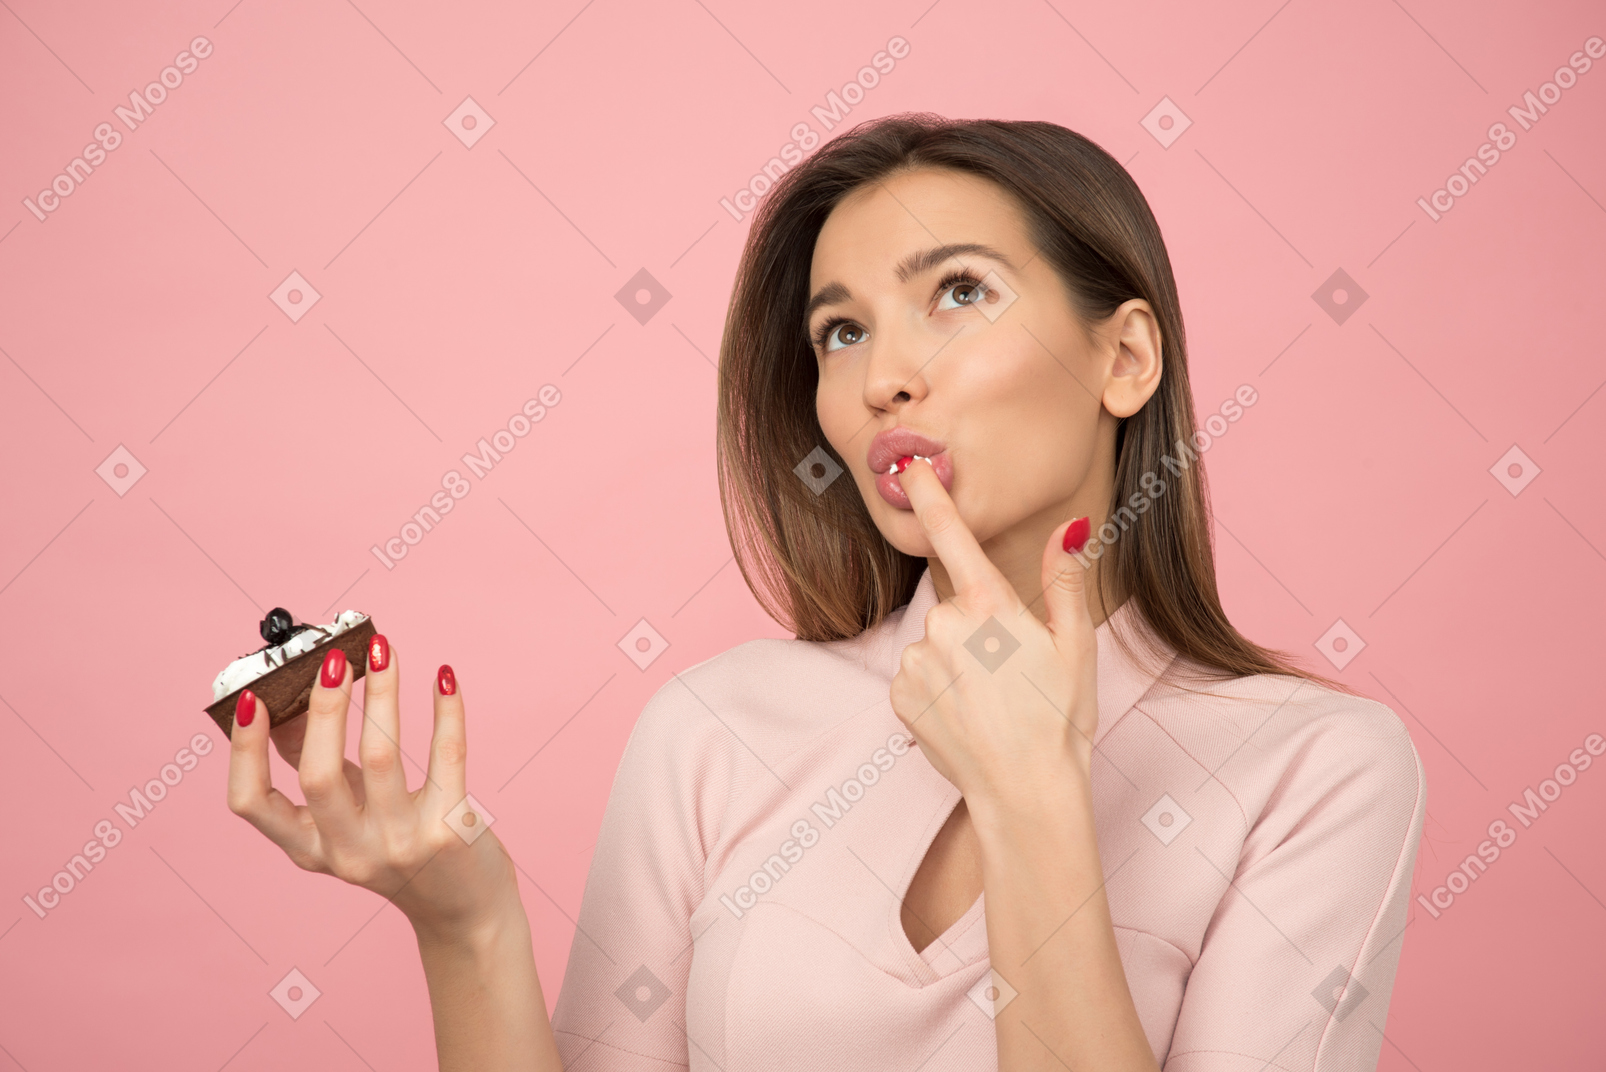 Attractive girl eating a cake and licking her finger